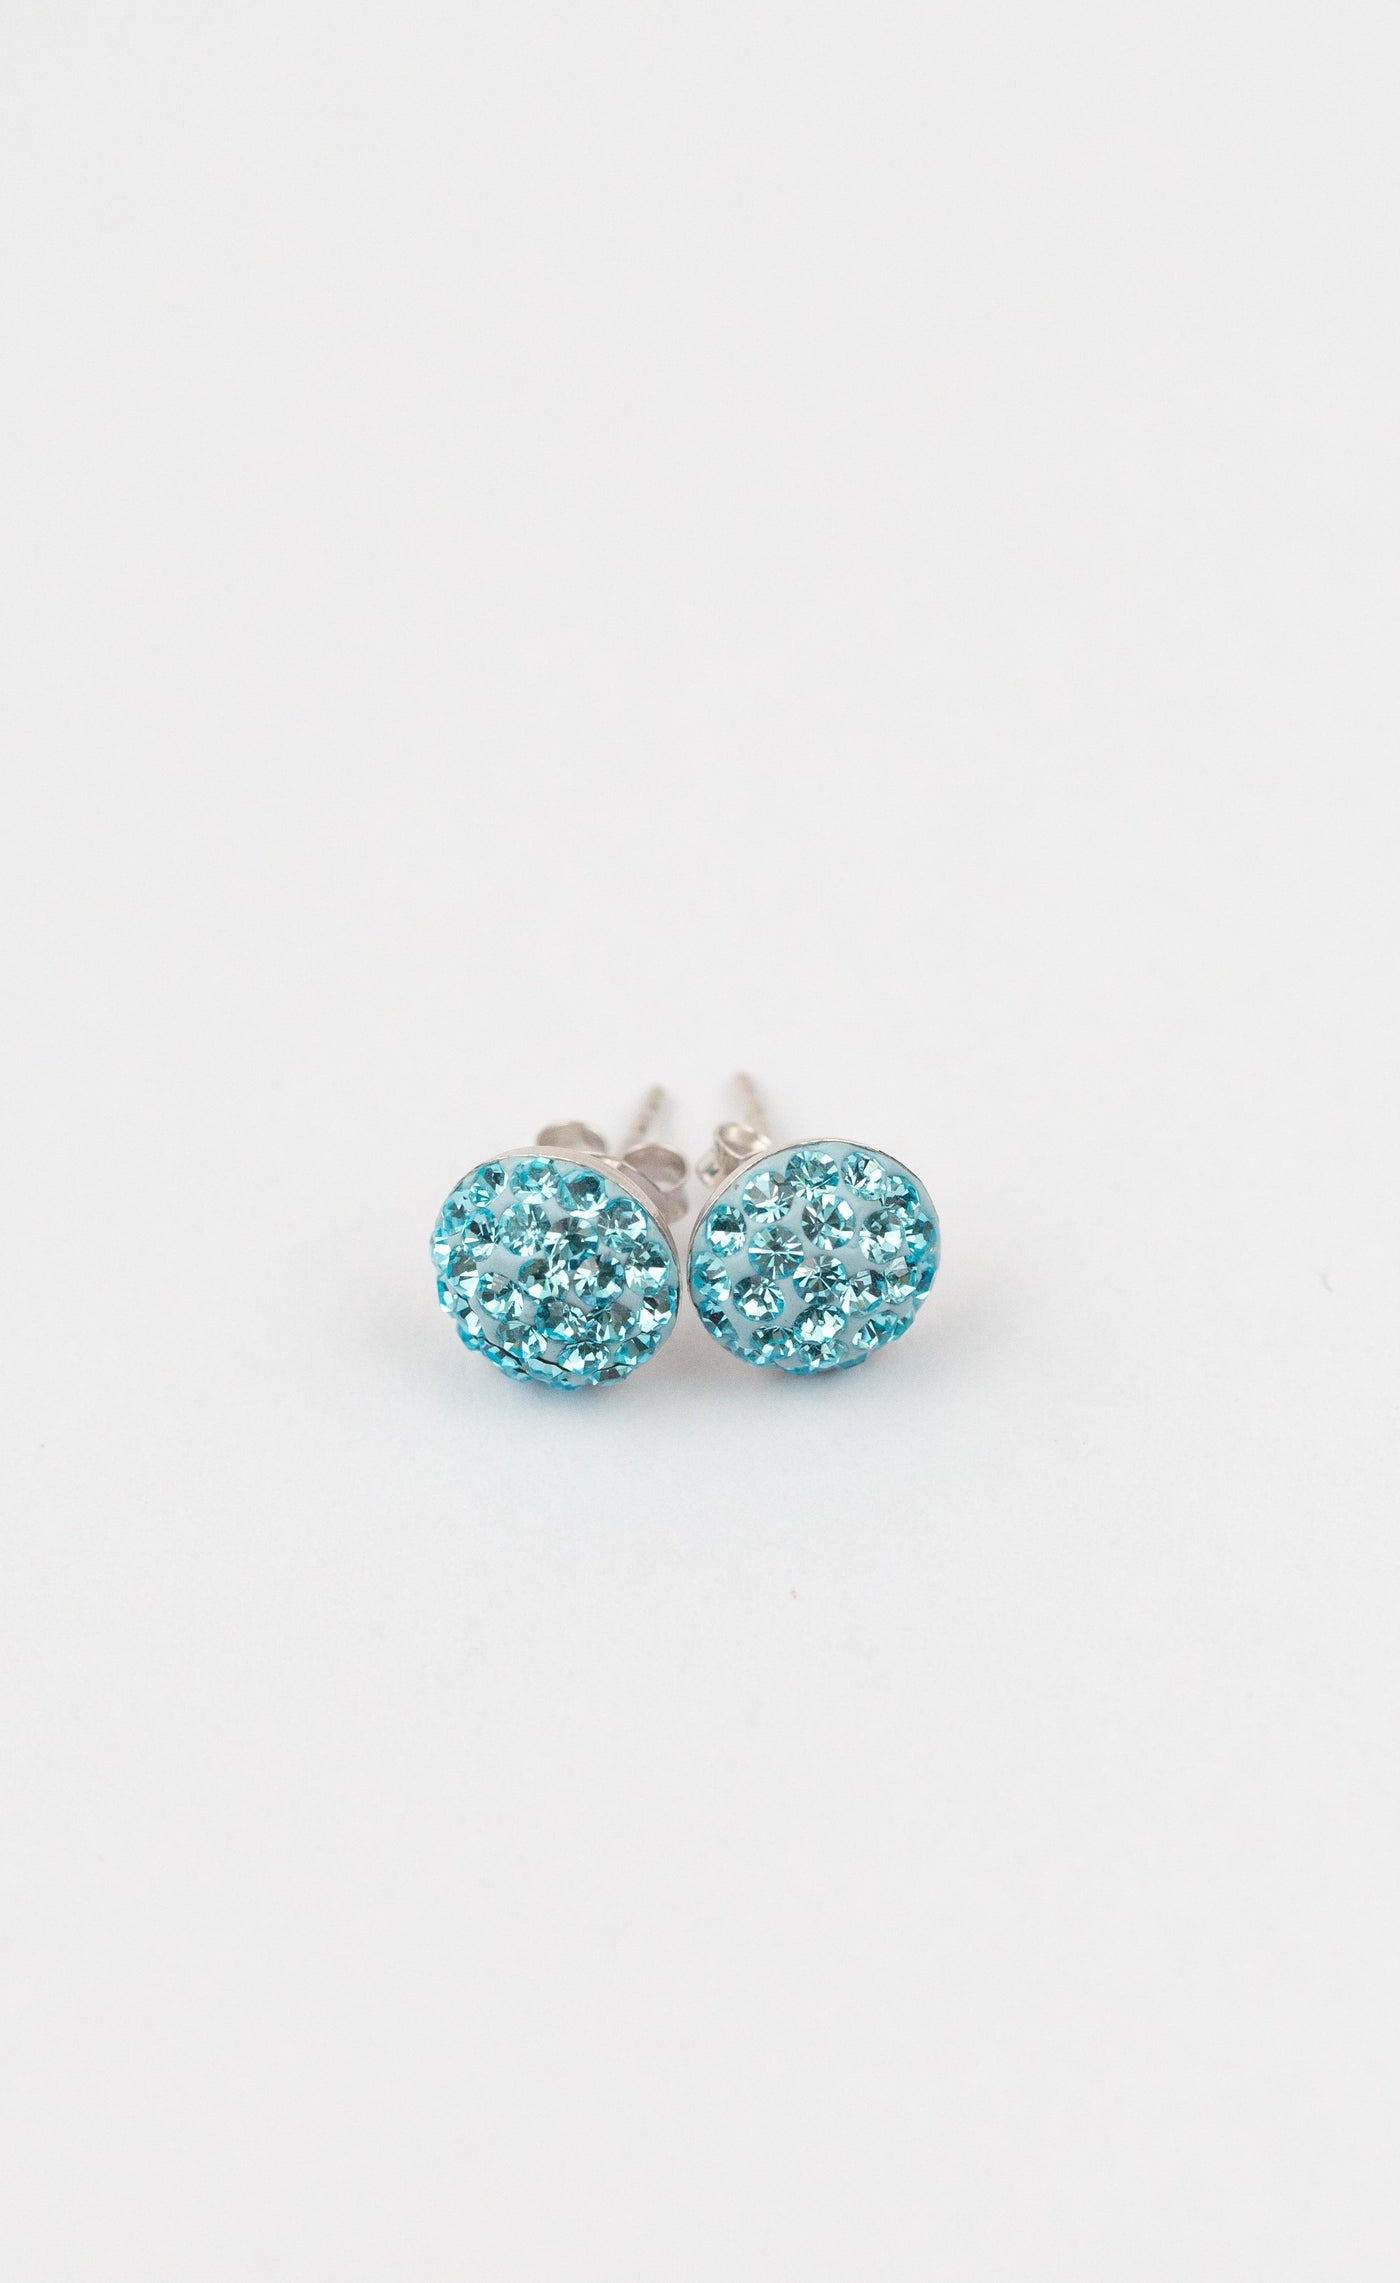 9mm Round Aquamarine Swarovski Crystal Sterling Silver Earrings | Annie and Sisters | sister stud earrings, for kids, children's jewelry, kid's jewelry, best friend